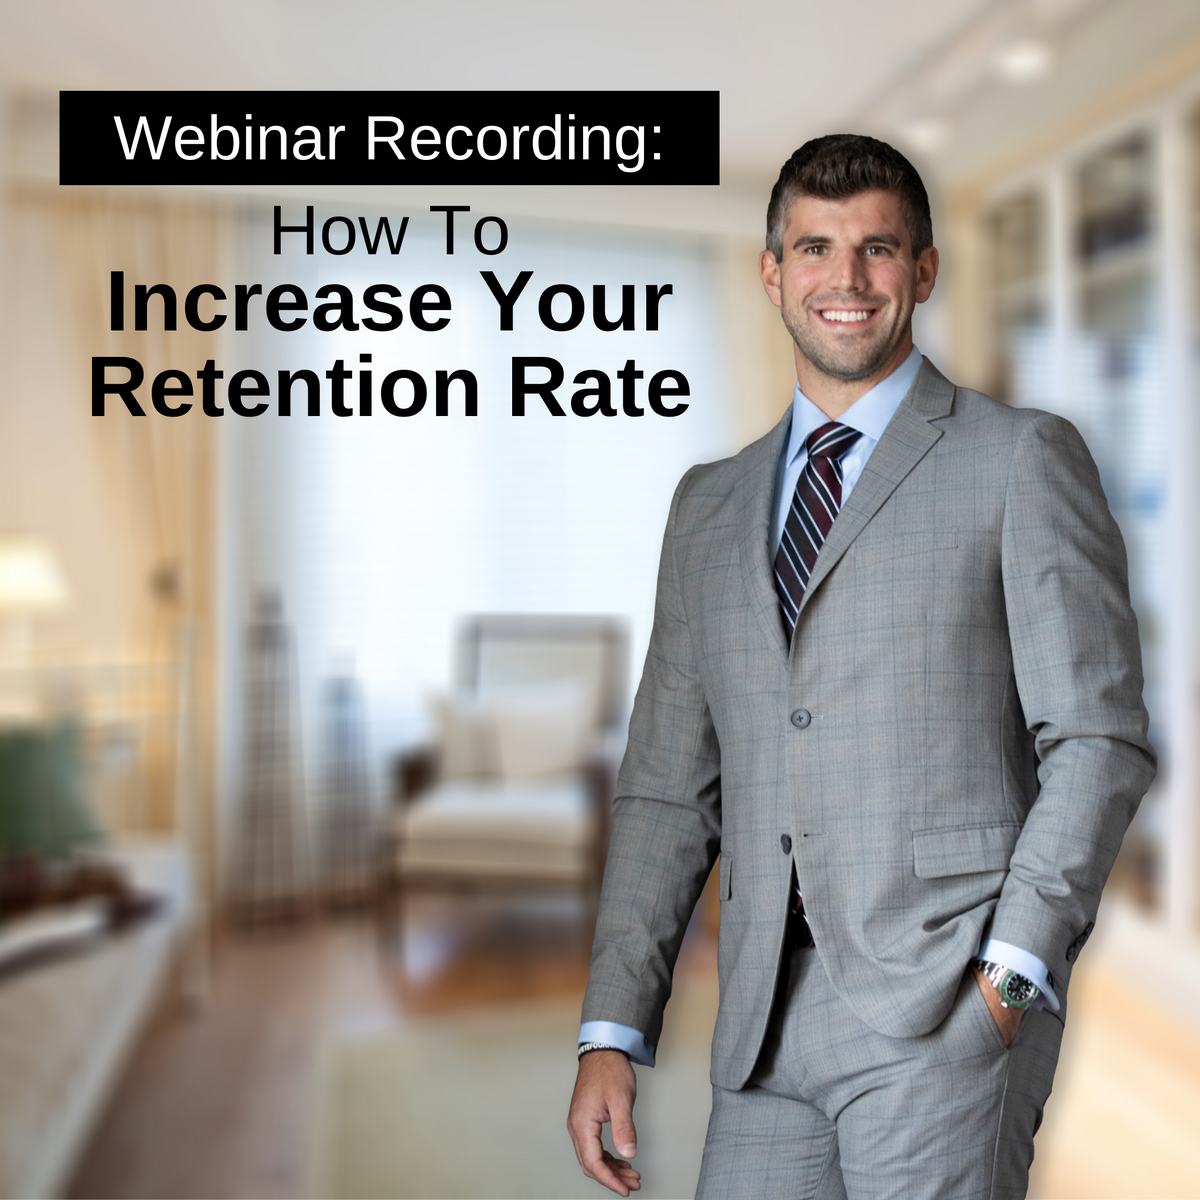 Training Video: How To Increase Your Retention Rate